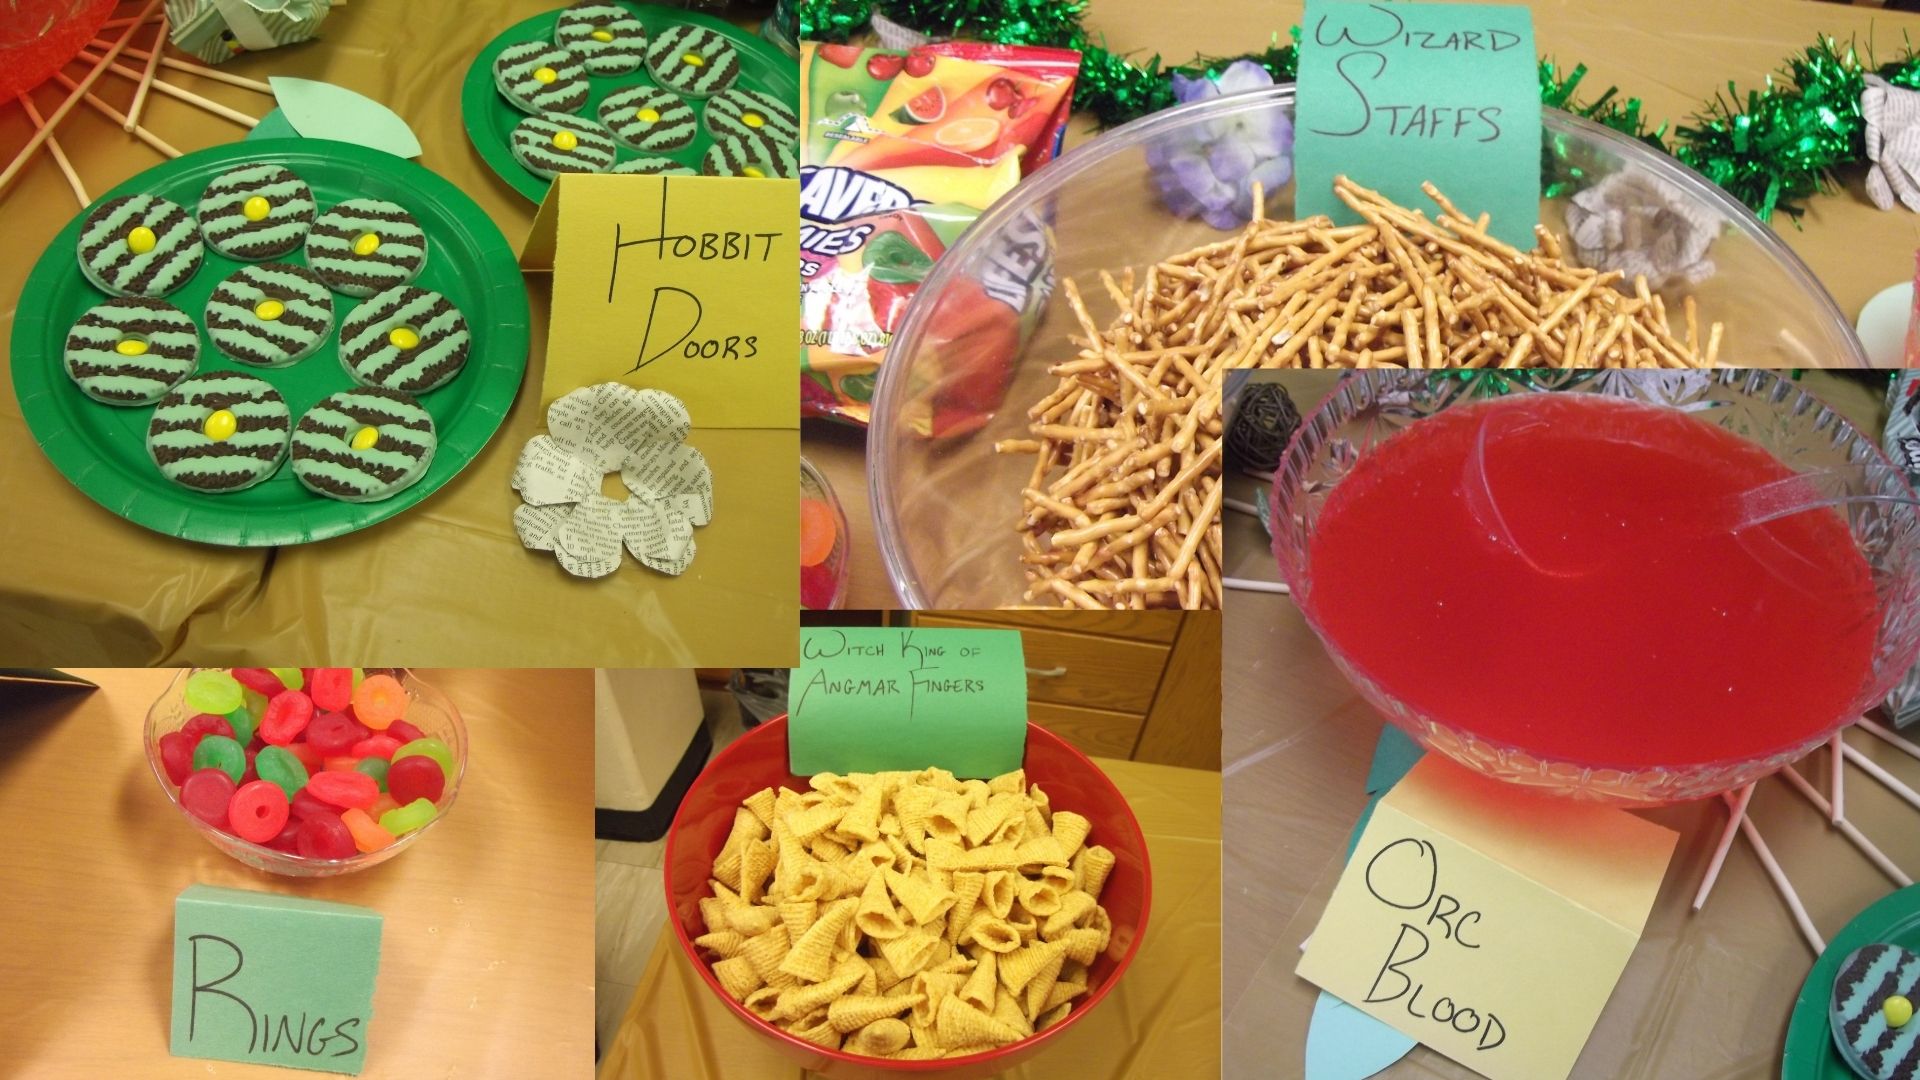 Lord of the Rings Party Snacks